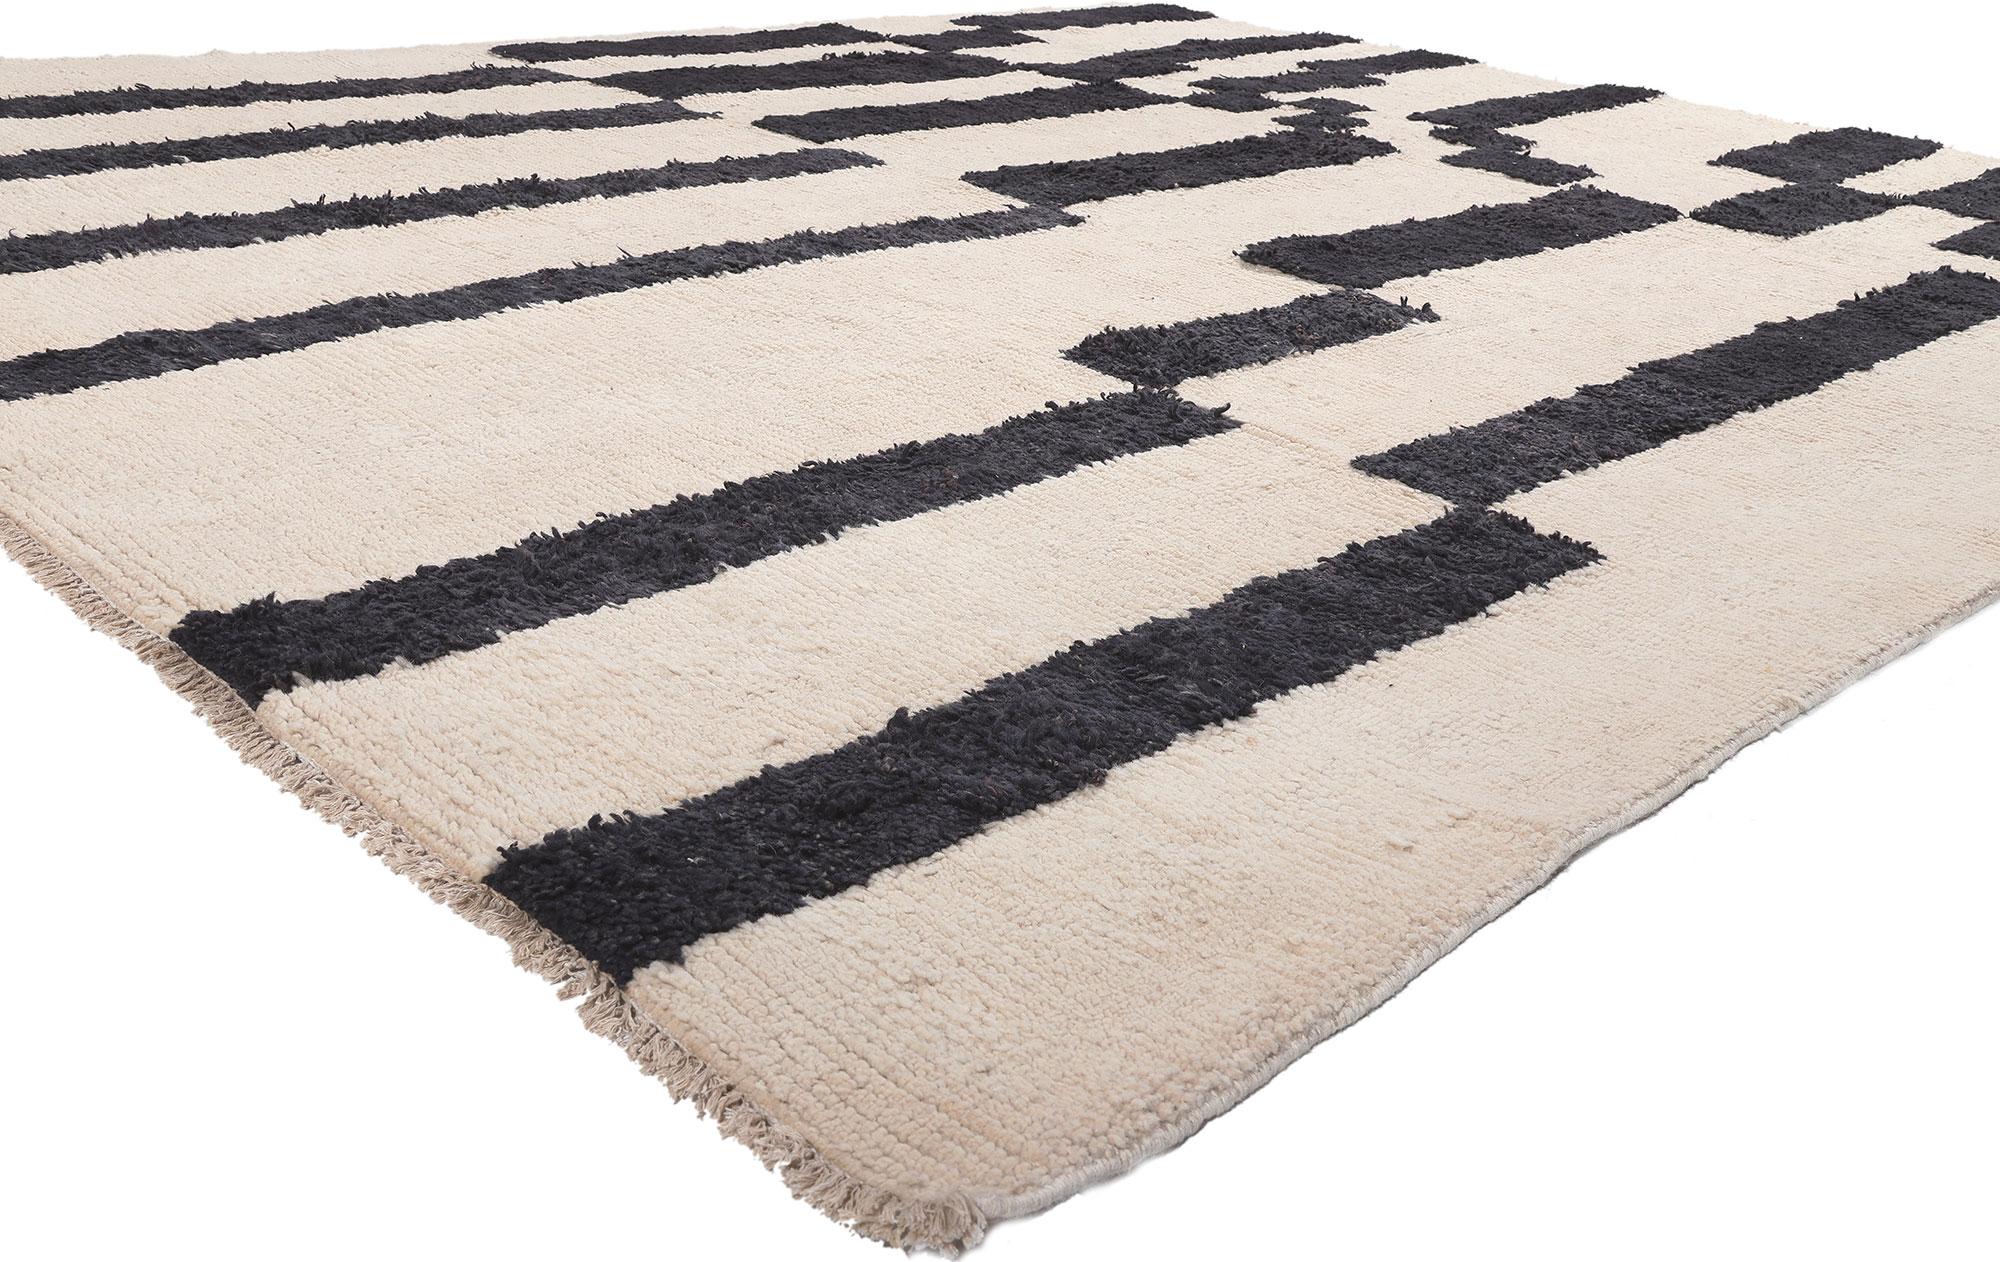 81013 Modern Bauhaus Moroccan Rug, 09'10 x 11'09. Emanating Bauhaus style with incredible detail and texture, this modern Moroccan area rug is a captivating vision of woven beauty. The eye-catching linear design and simplistic colorway woven into